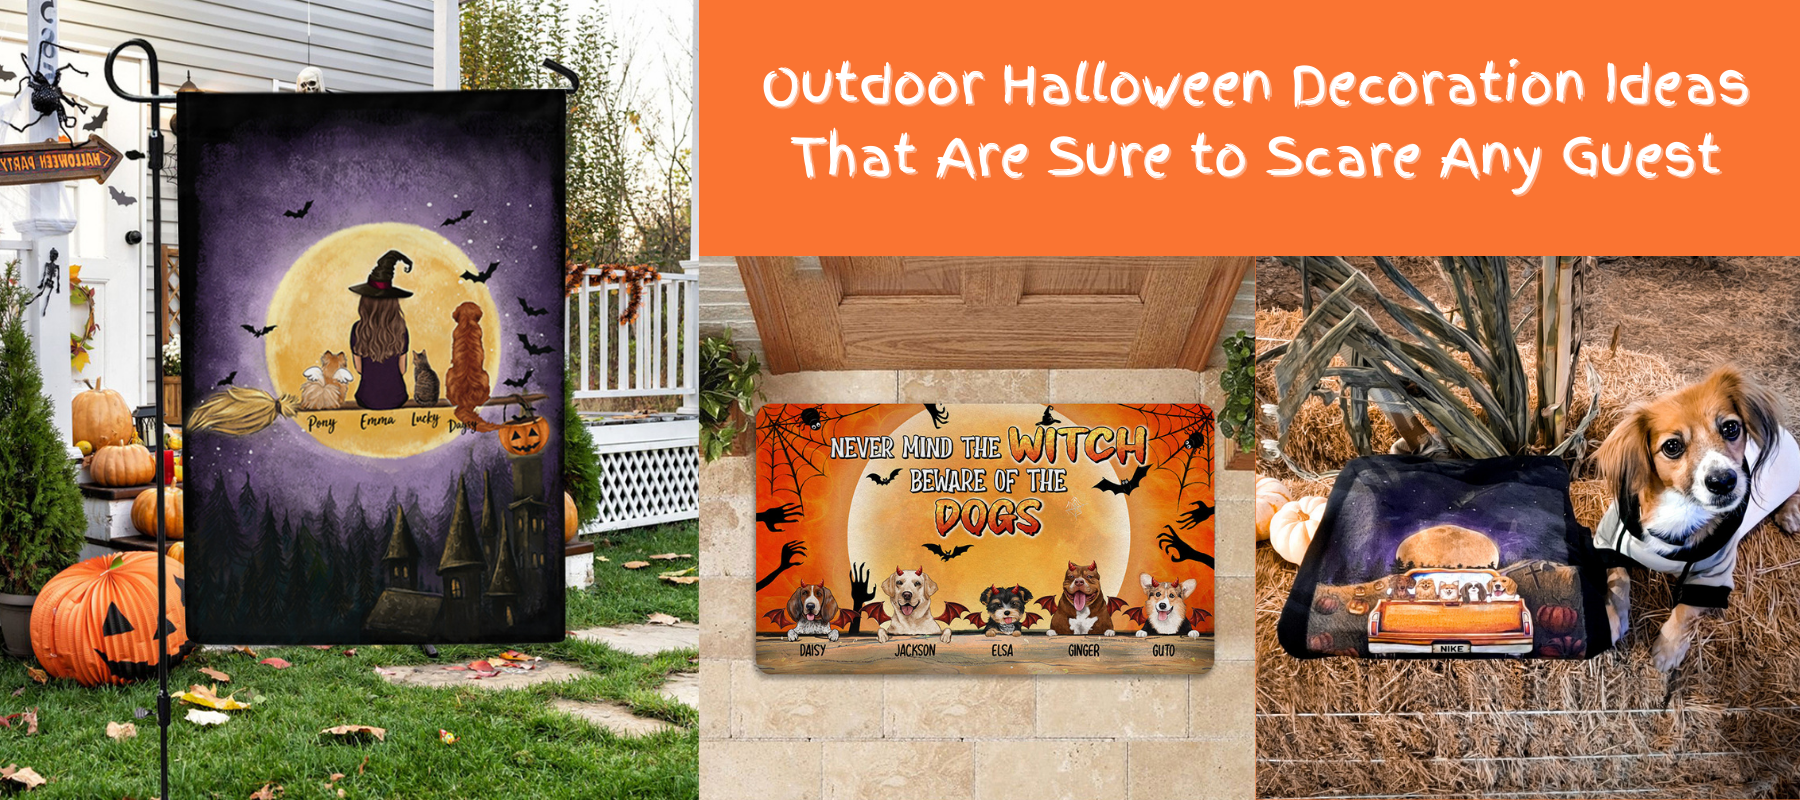 Outdoor Halloween Decoration Ideas That Are Sure to Scare Any Guest